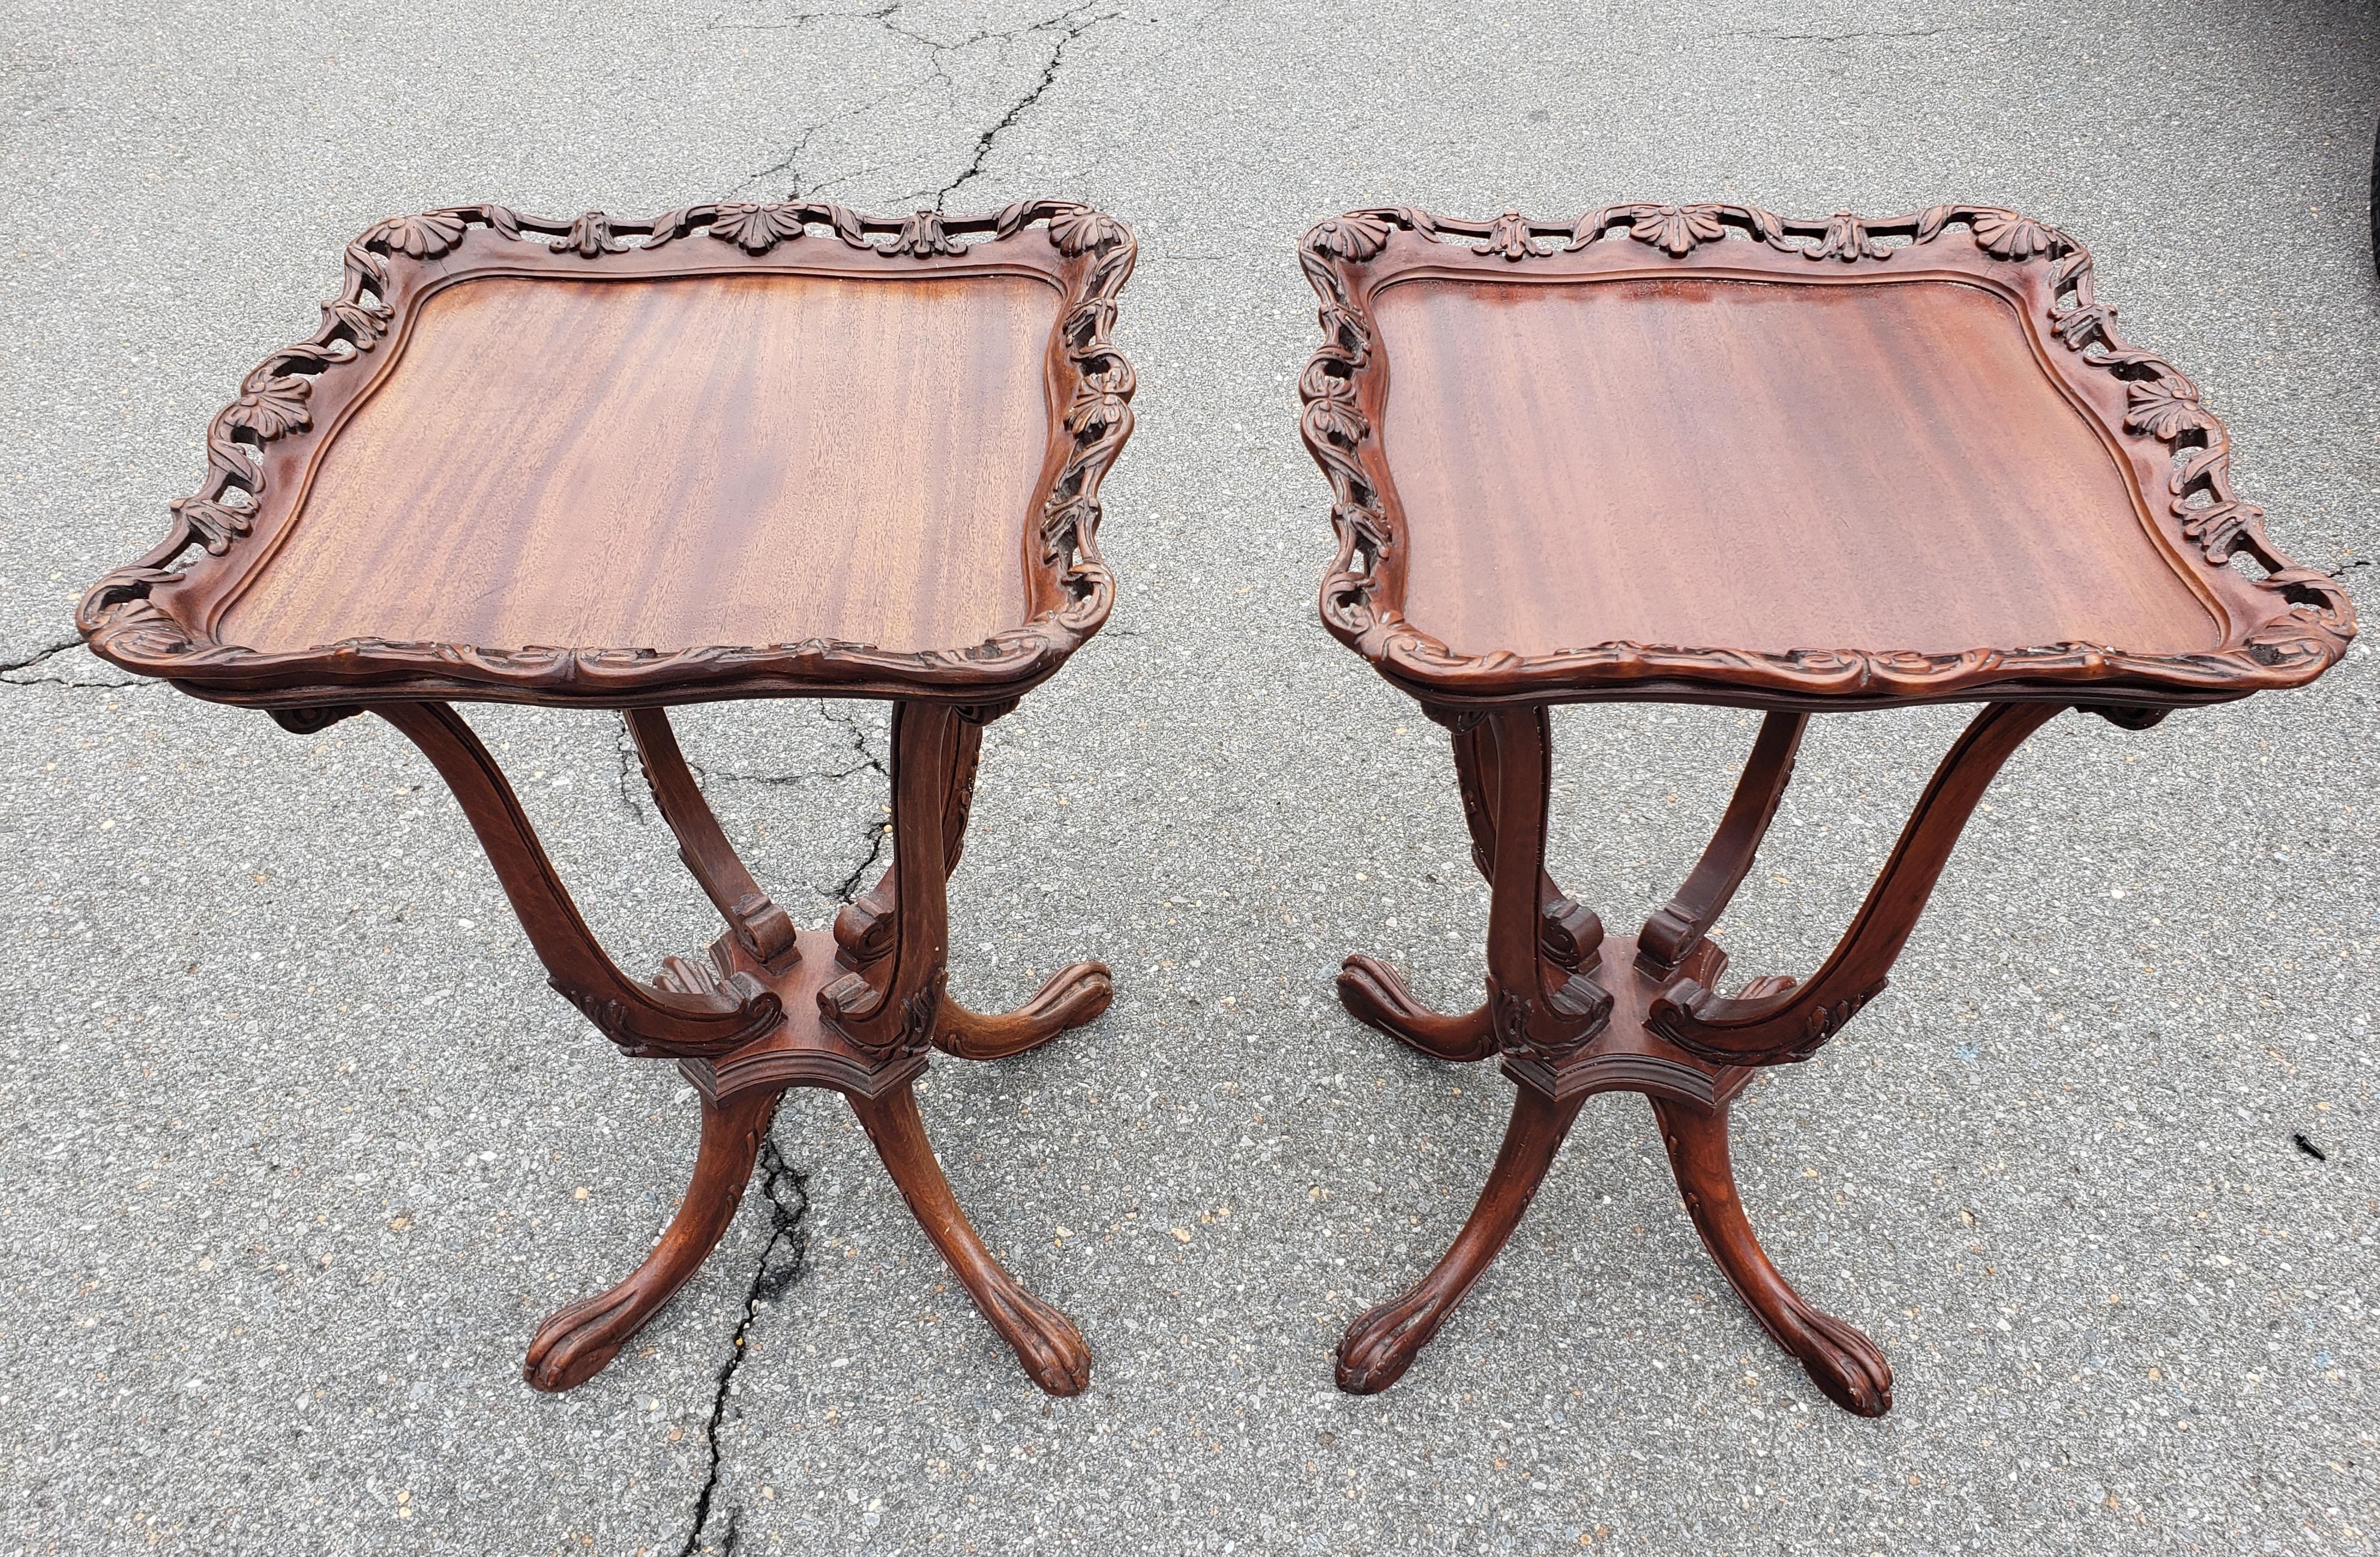 An original Pair of George III Style Carved Galleried Mahogany Quadpod  Side Tables with paw Feet. Table measure 20